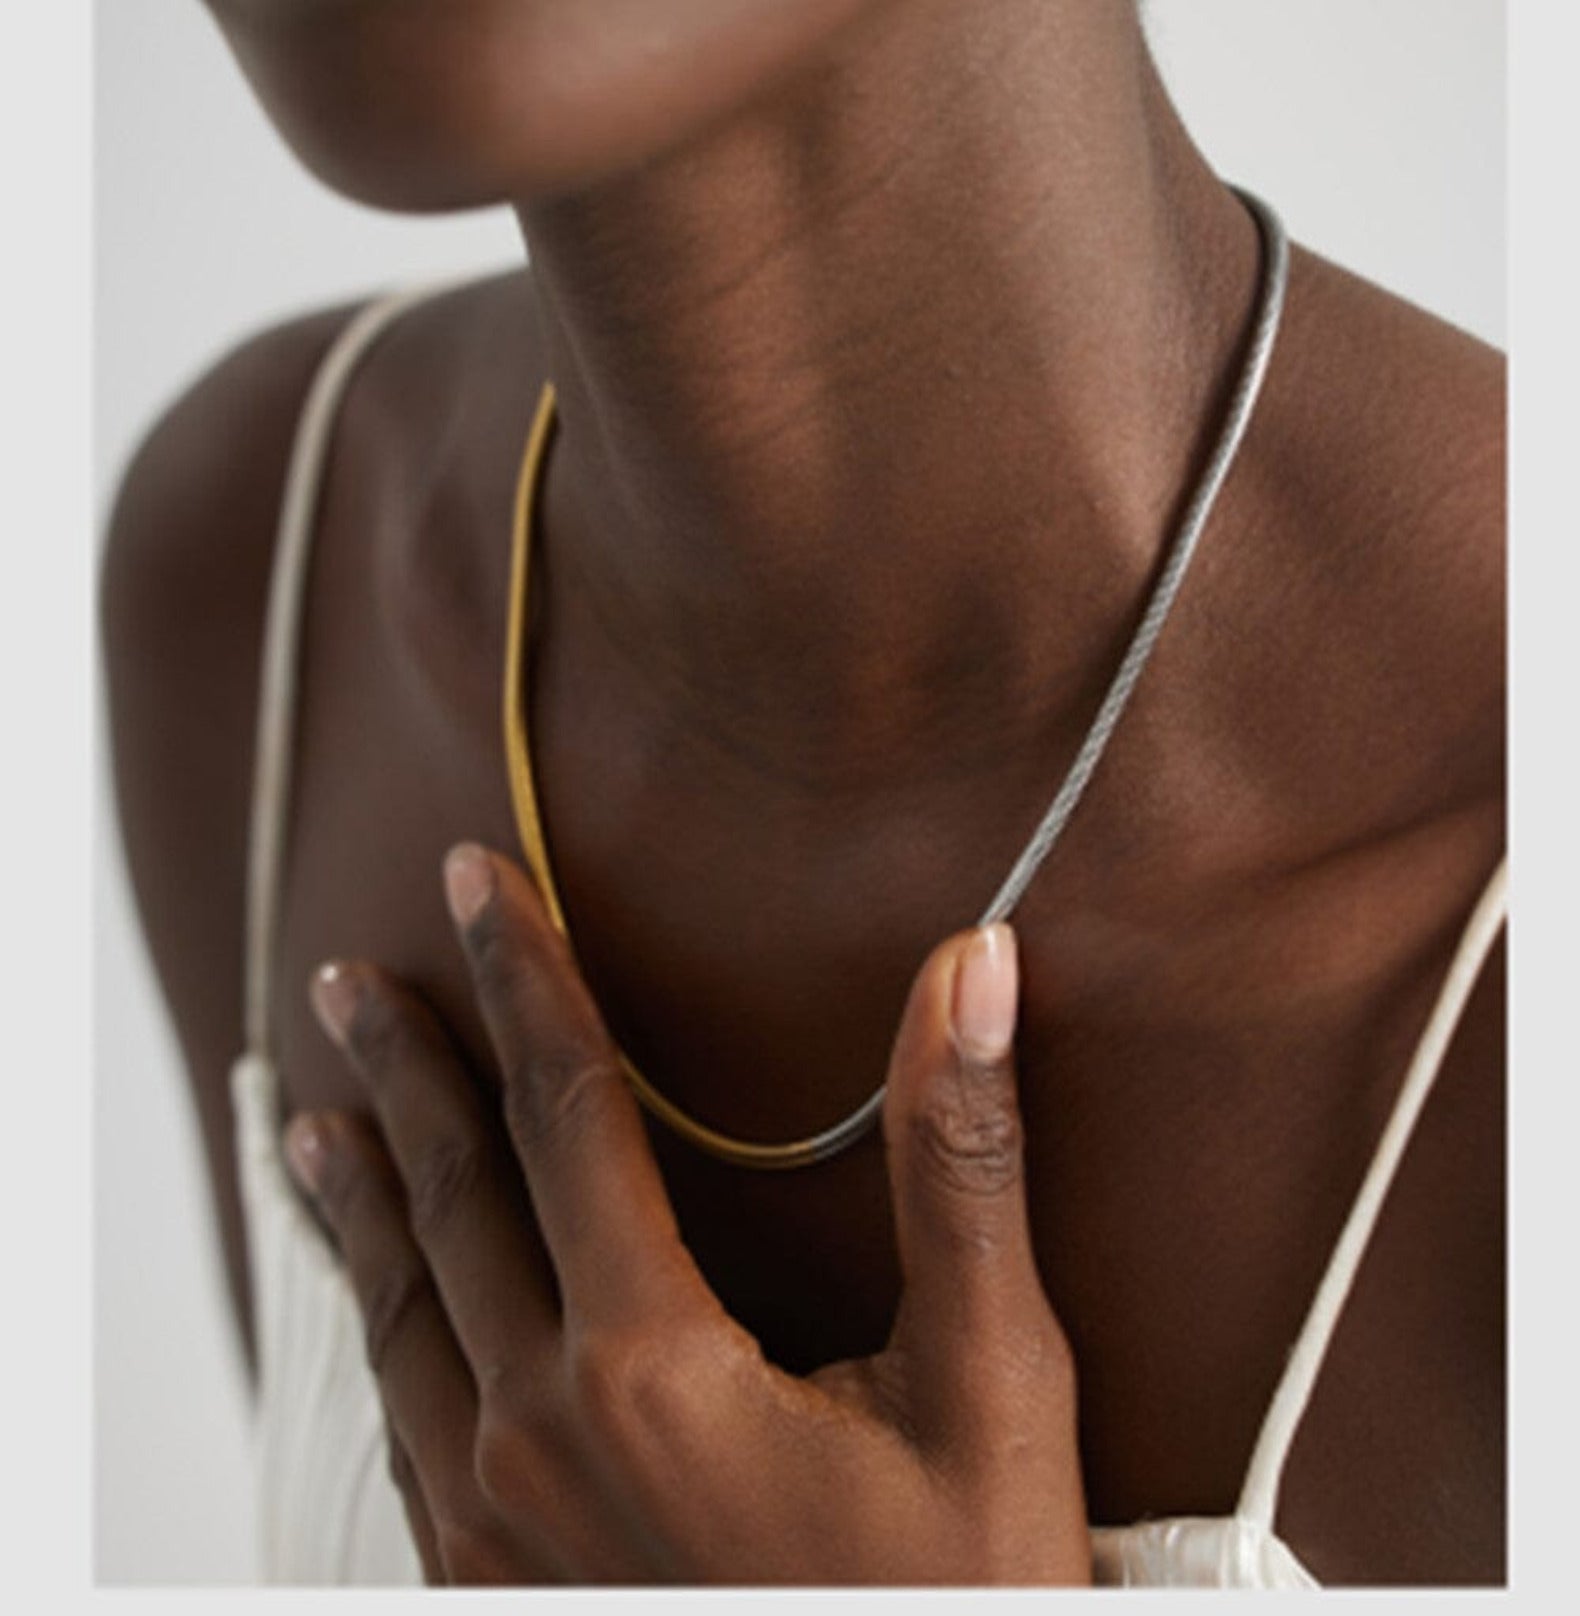 TWINS CHAIN neck Yubama Jewelry Online Store - The Elegant Designs of Gold and Silver ! 